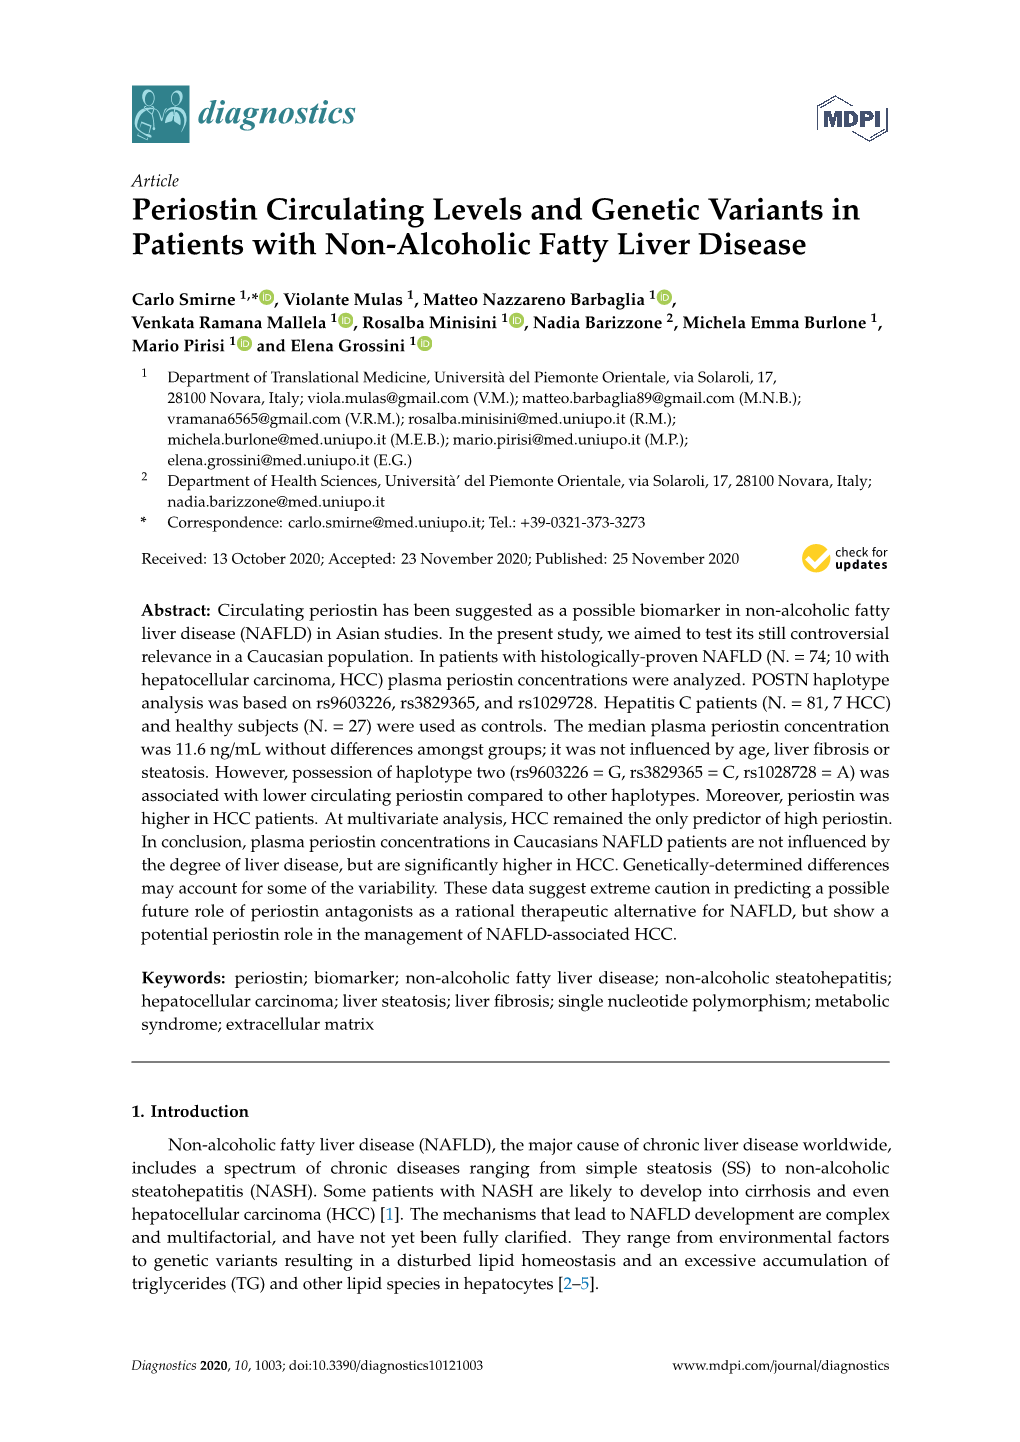 Periostin Circulating Levels and Genetic Variants in Patients with Non-Alcoholic Fatty Liver Disease